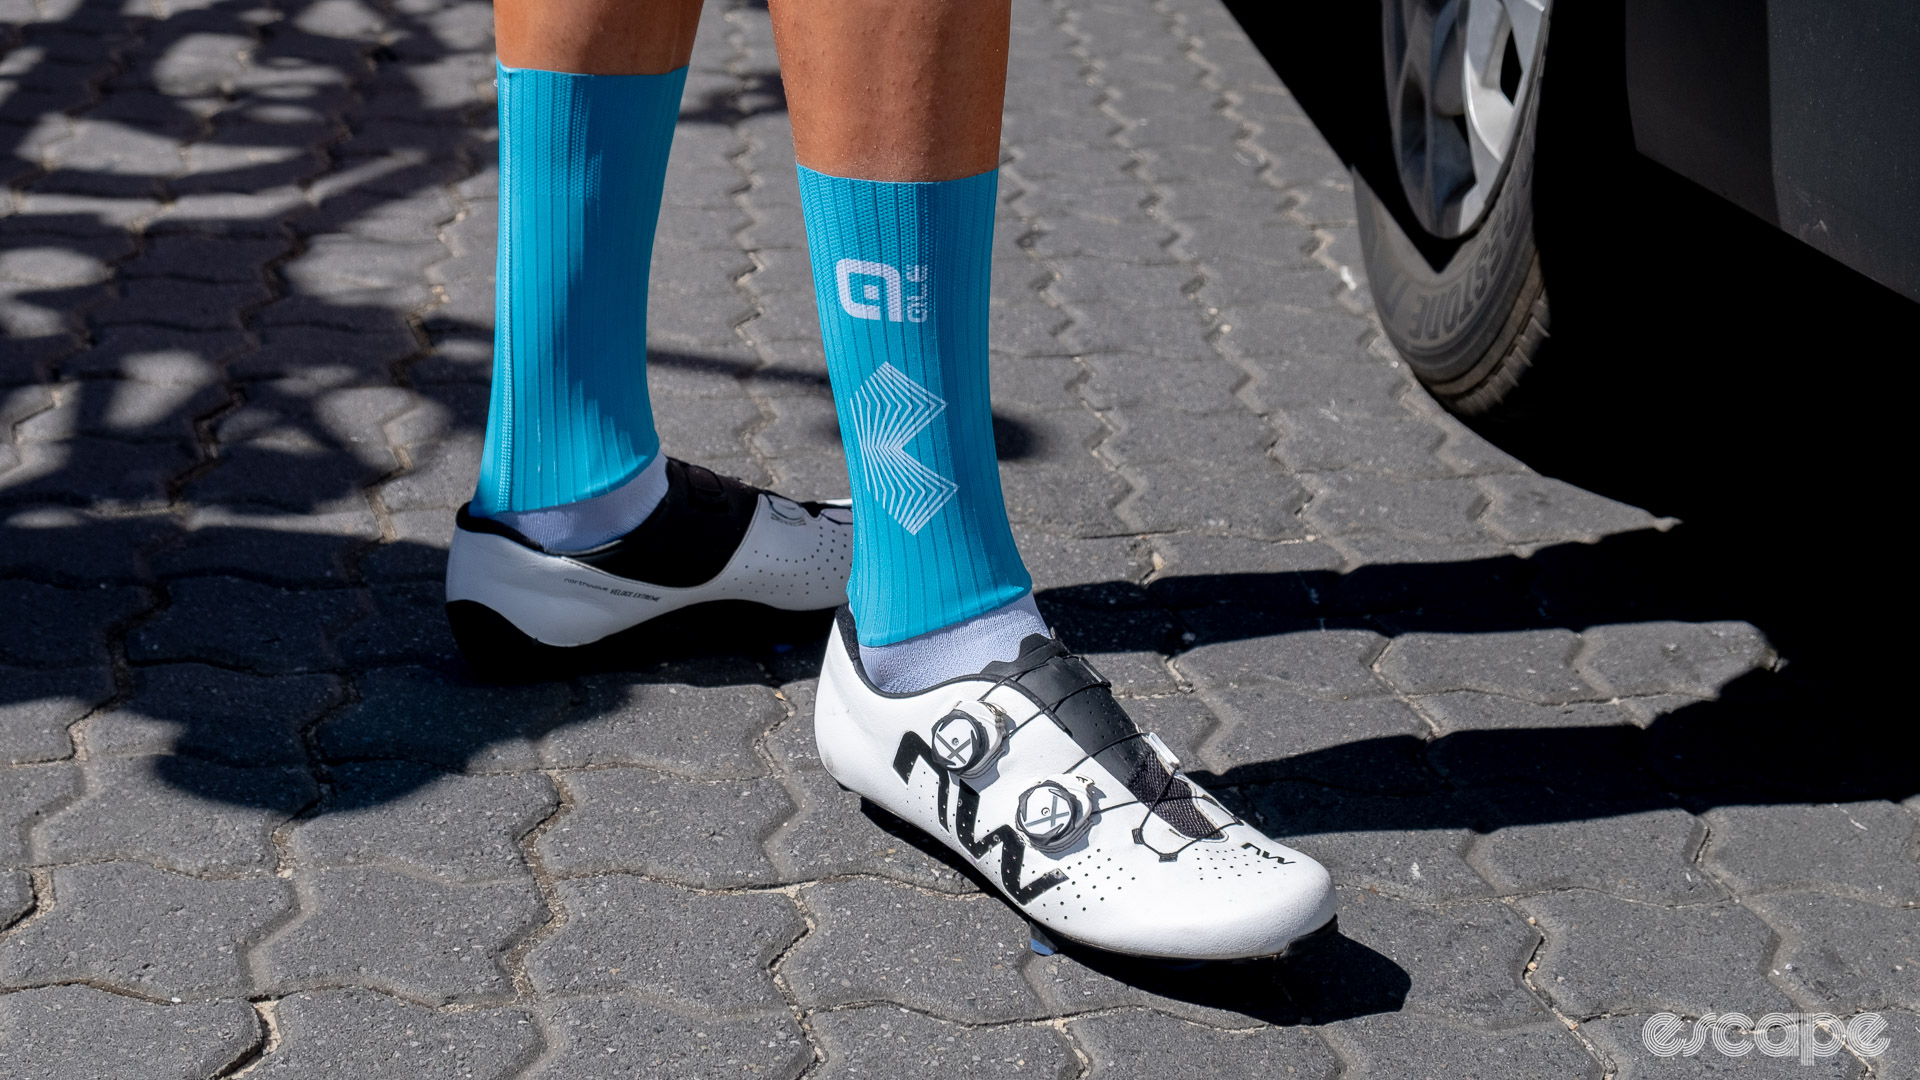 The photo shows blue Bahrain-Victorious team aero socks and Northwave's new Veloce shoes in white. 